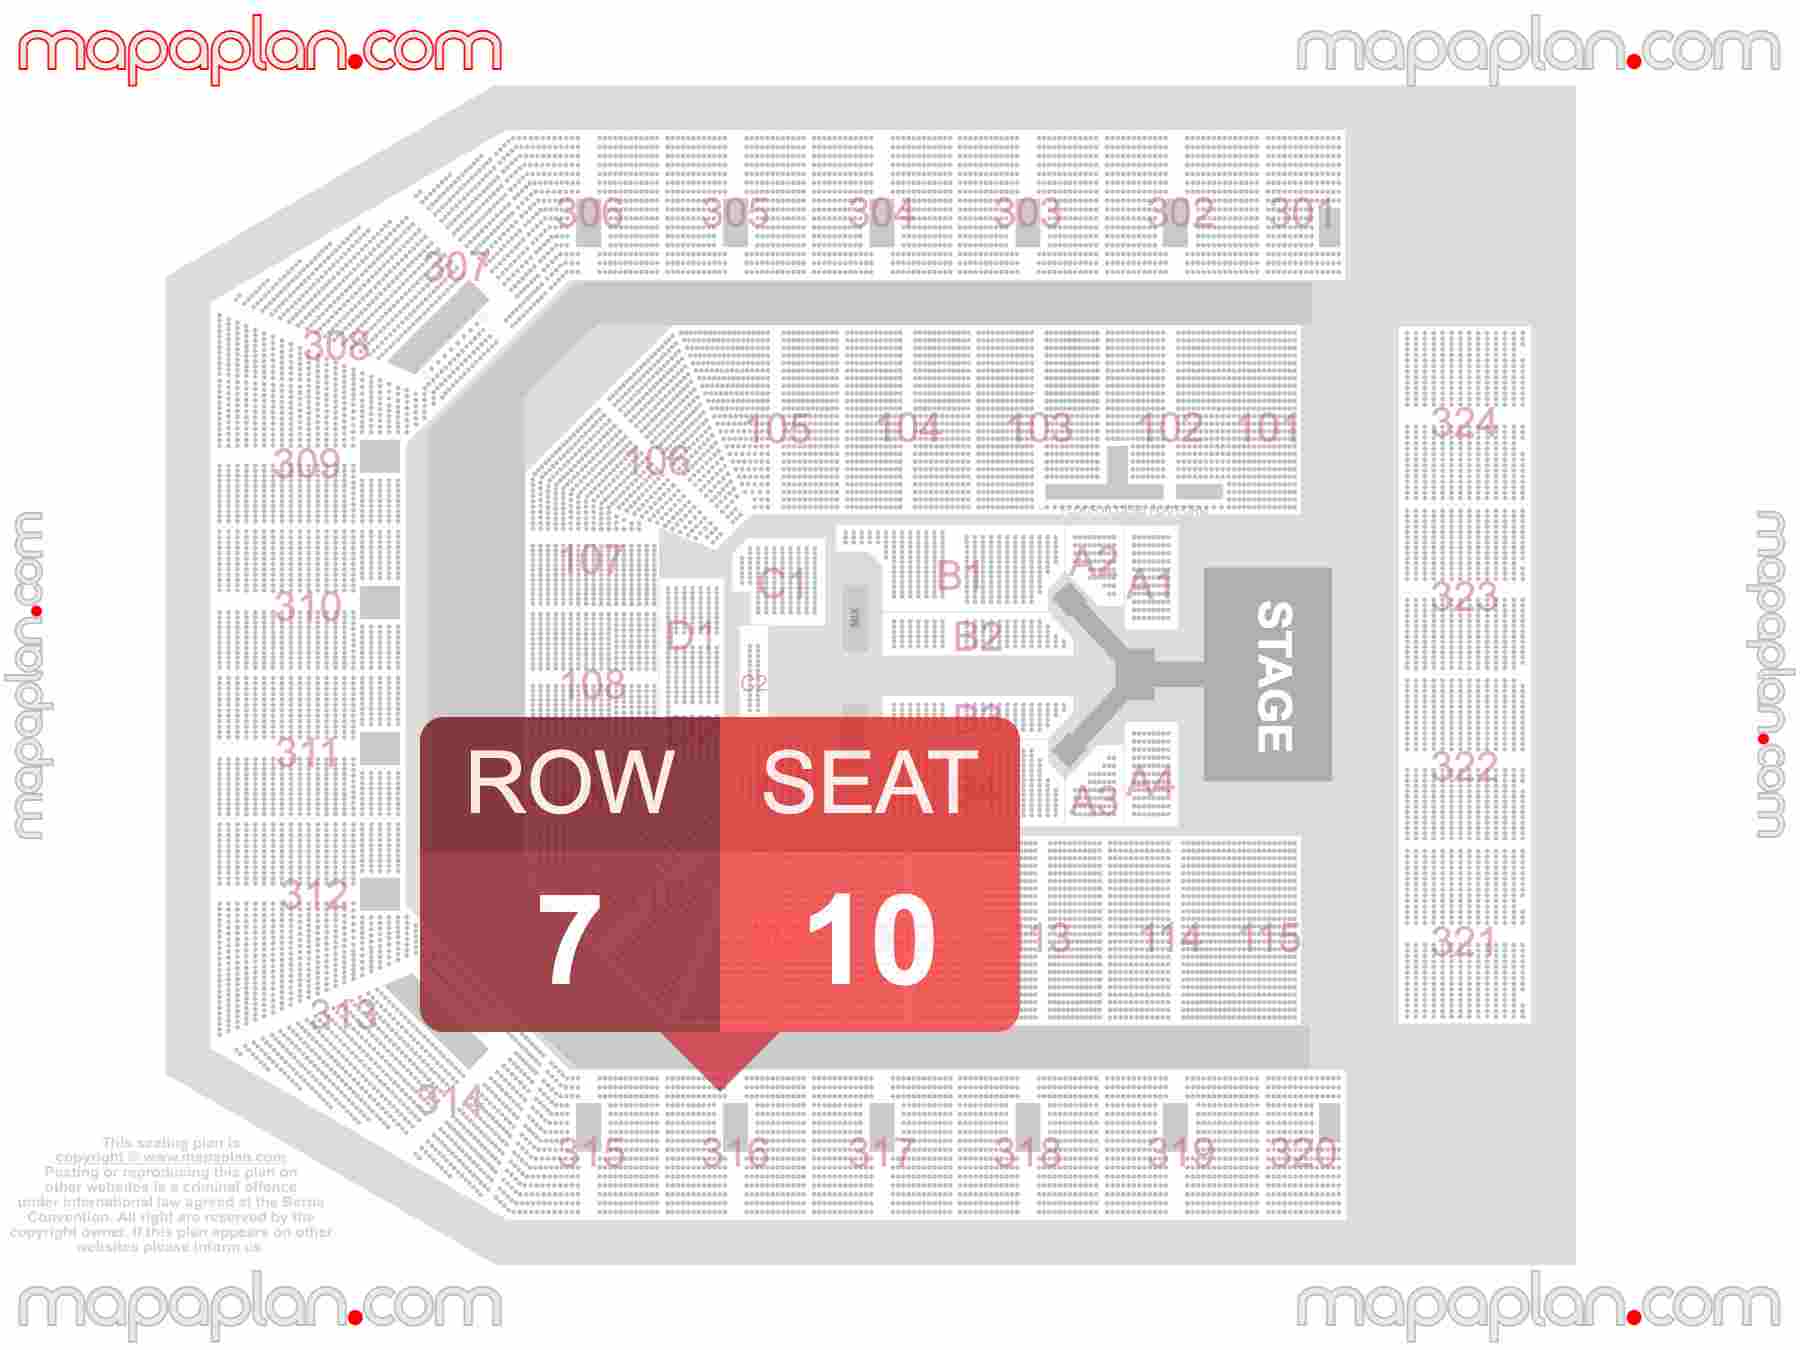 Manchester Co-op Live seating plan Catwalk extended runway concert stage seating plan with exact section numbers showing best rows and seats selection 3d layout - Best interactive seat finder tool with precise detailed location data